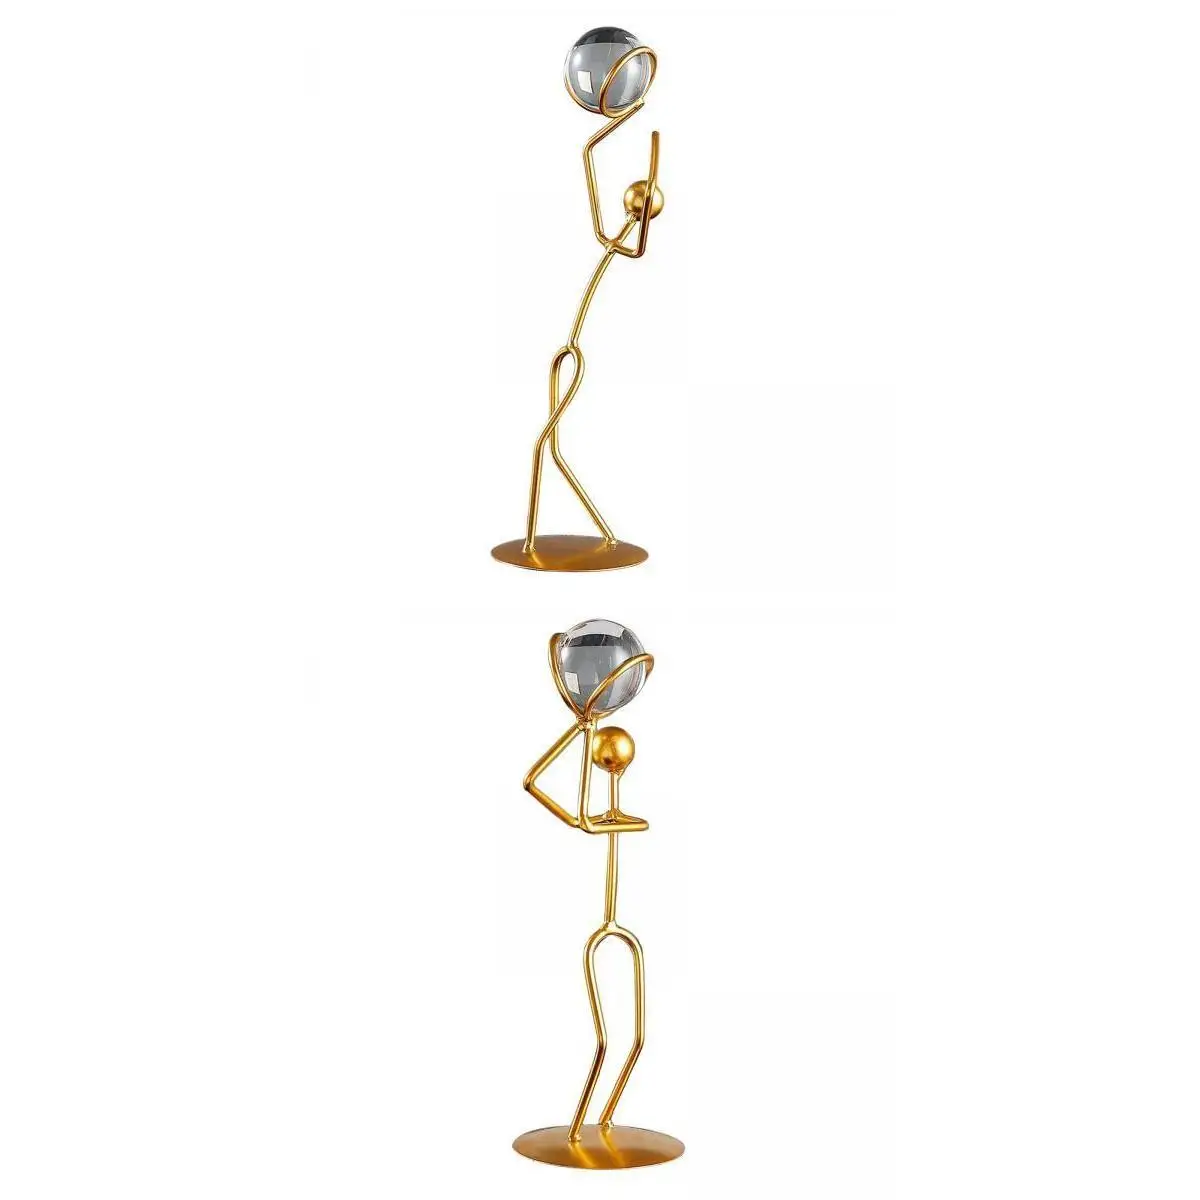 2 Pieces Crystal Ball Figurines with Metal Stand Ornaments for Table Office 